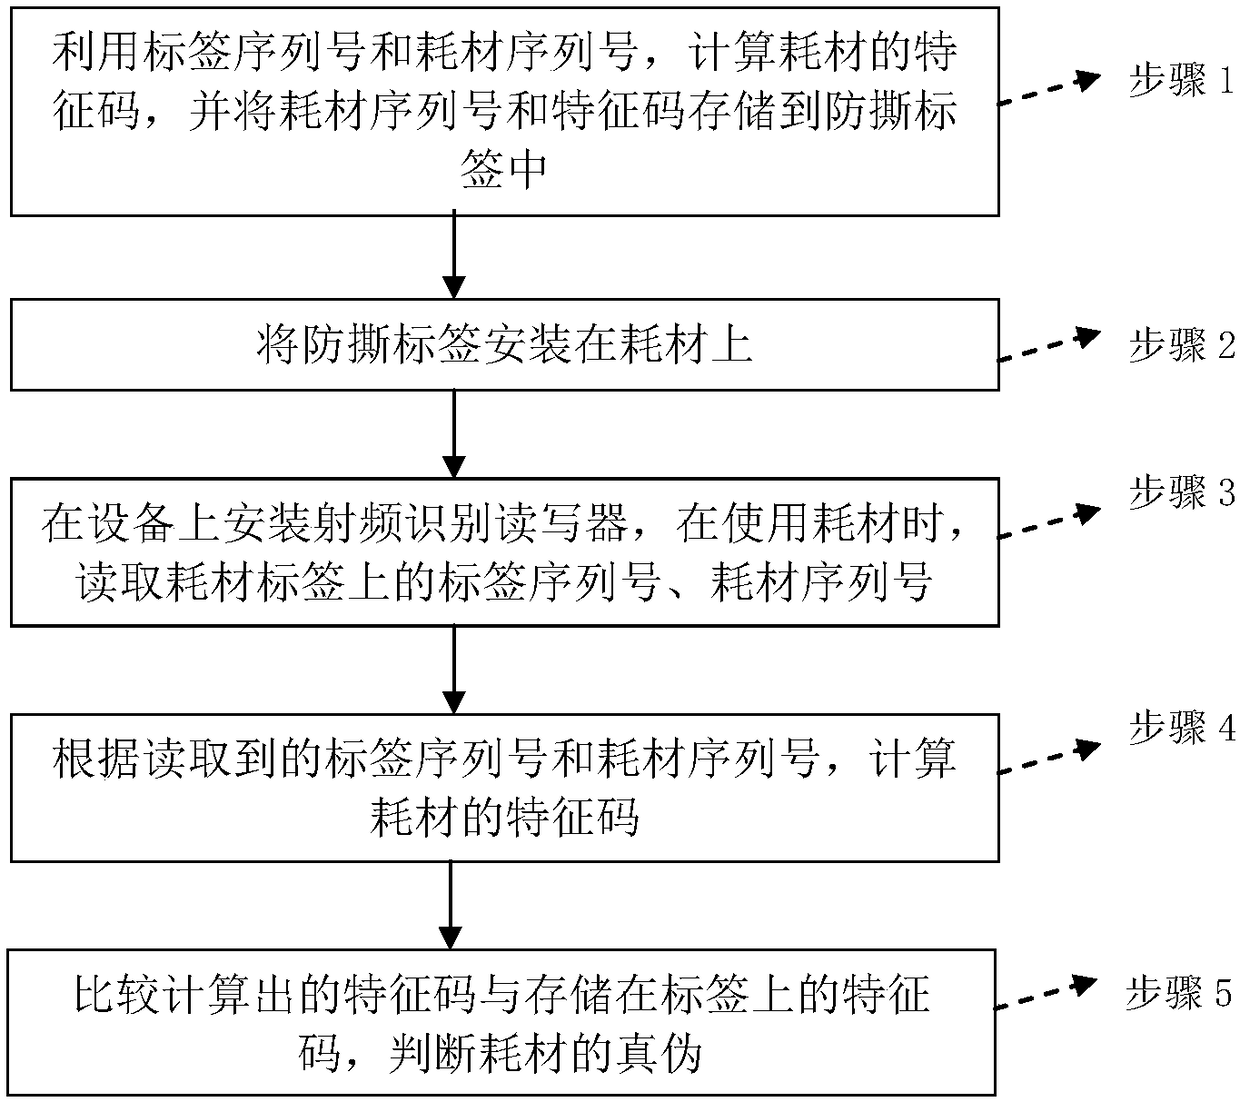 Method using radio frequency identification to realize consumable false proof effect